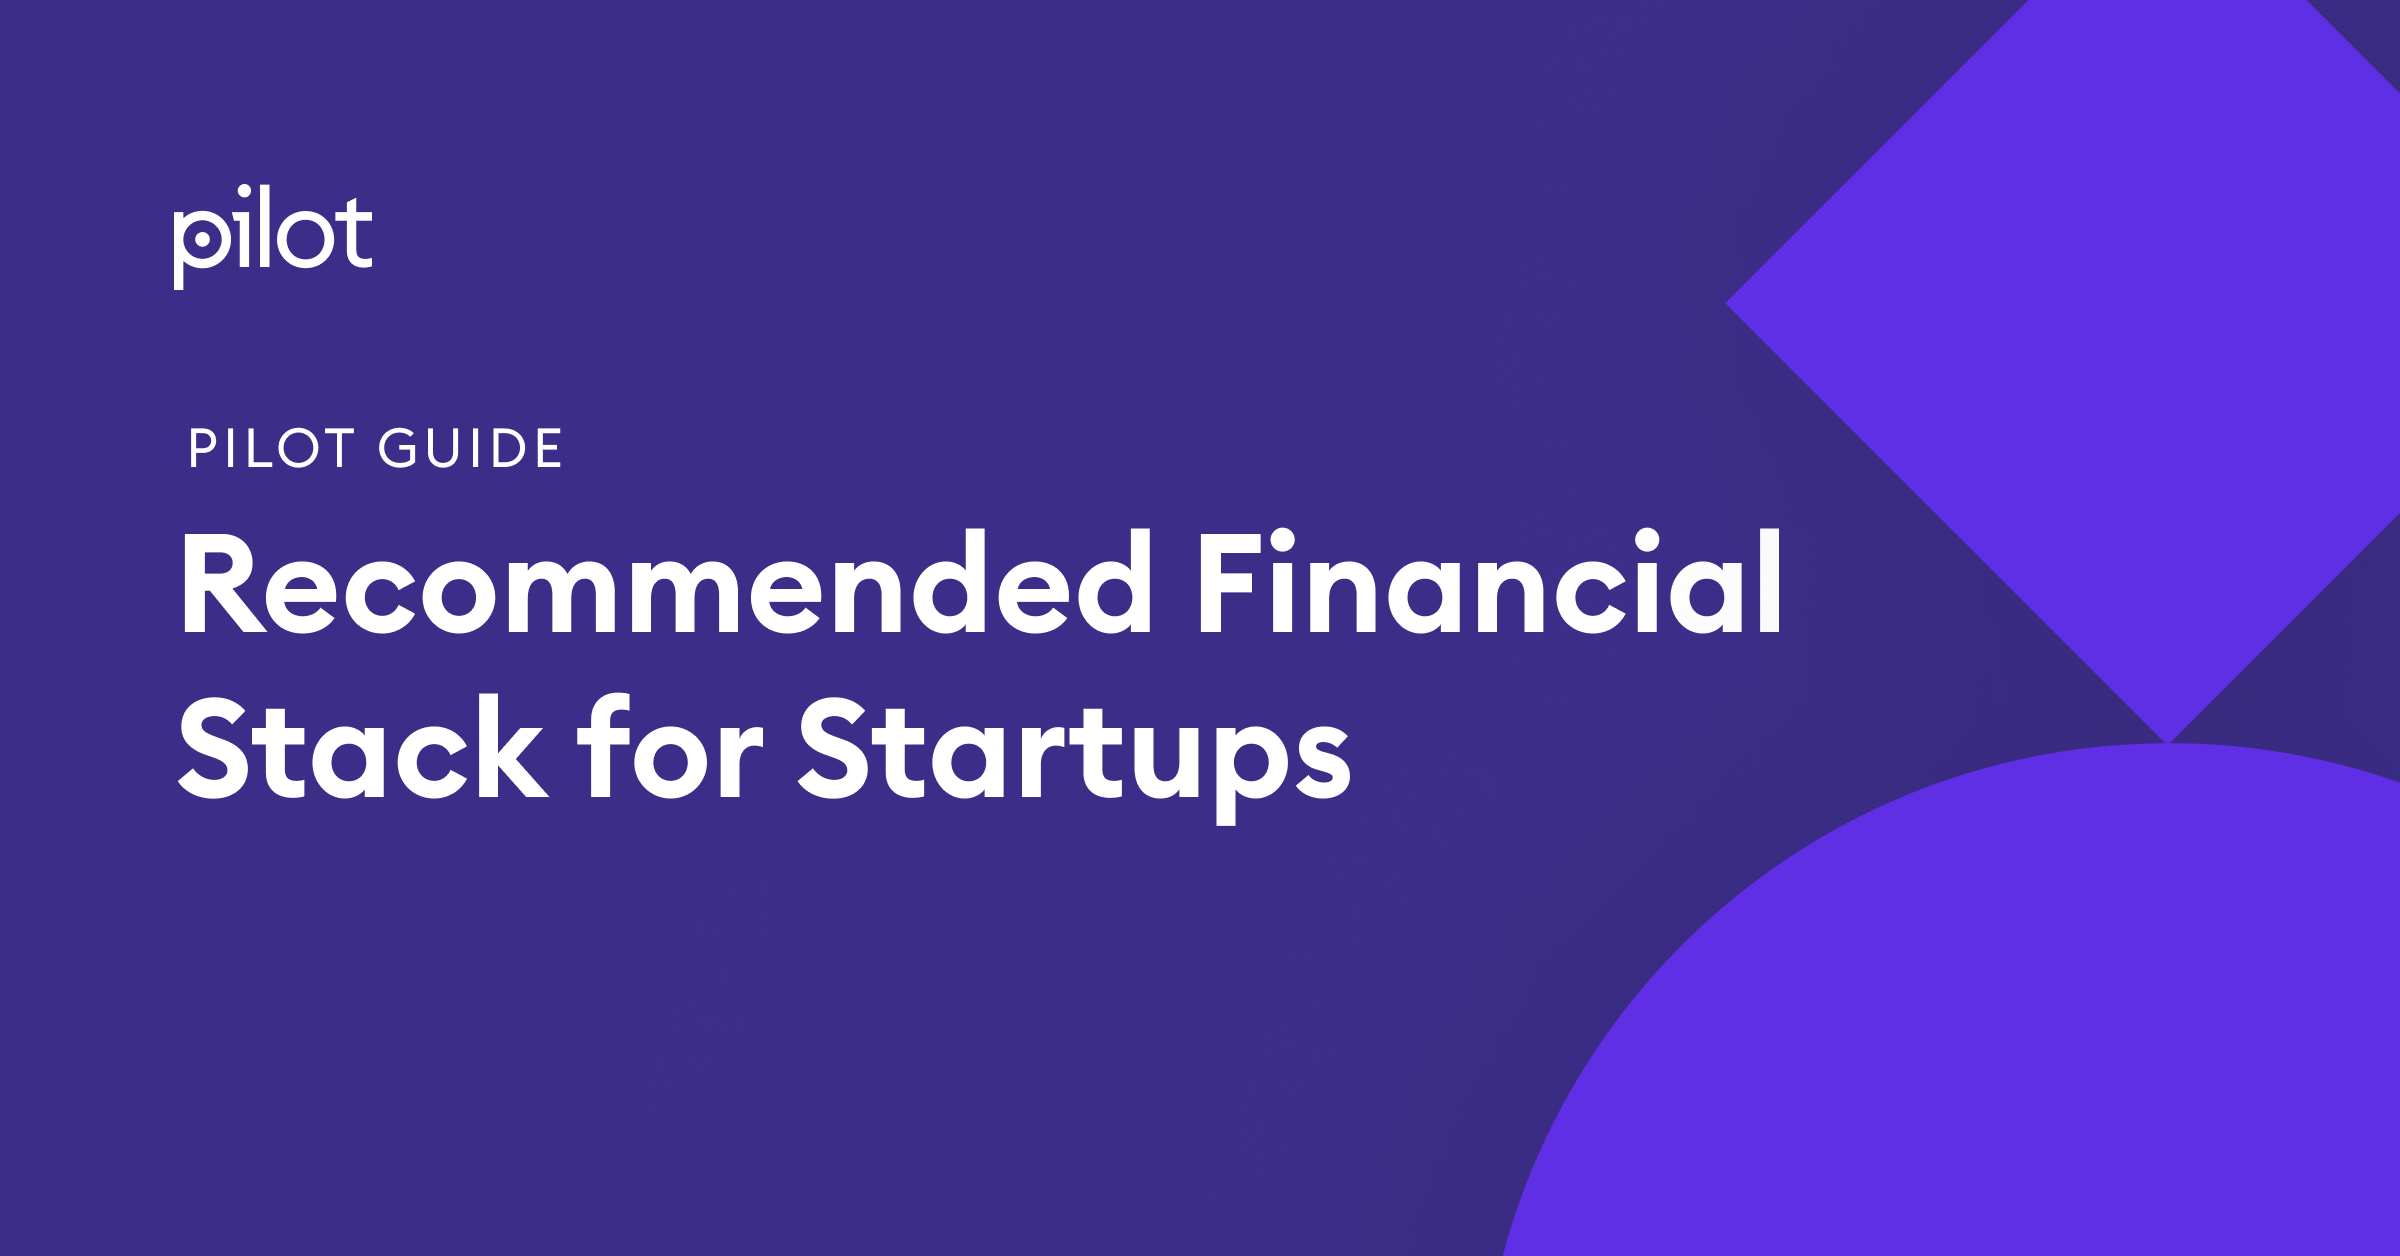 Pilot Guide: Recommended Financial Stack for Startups